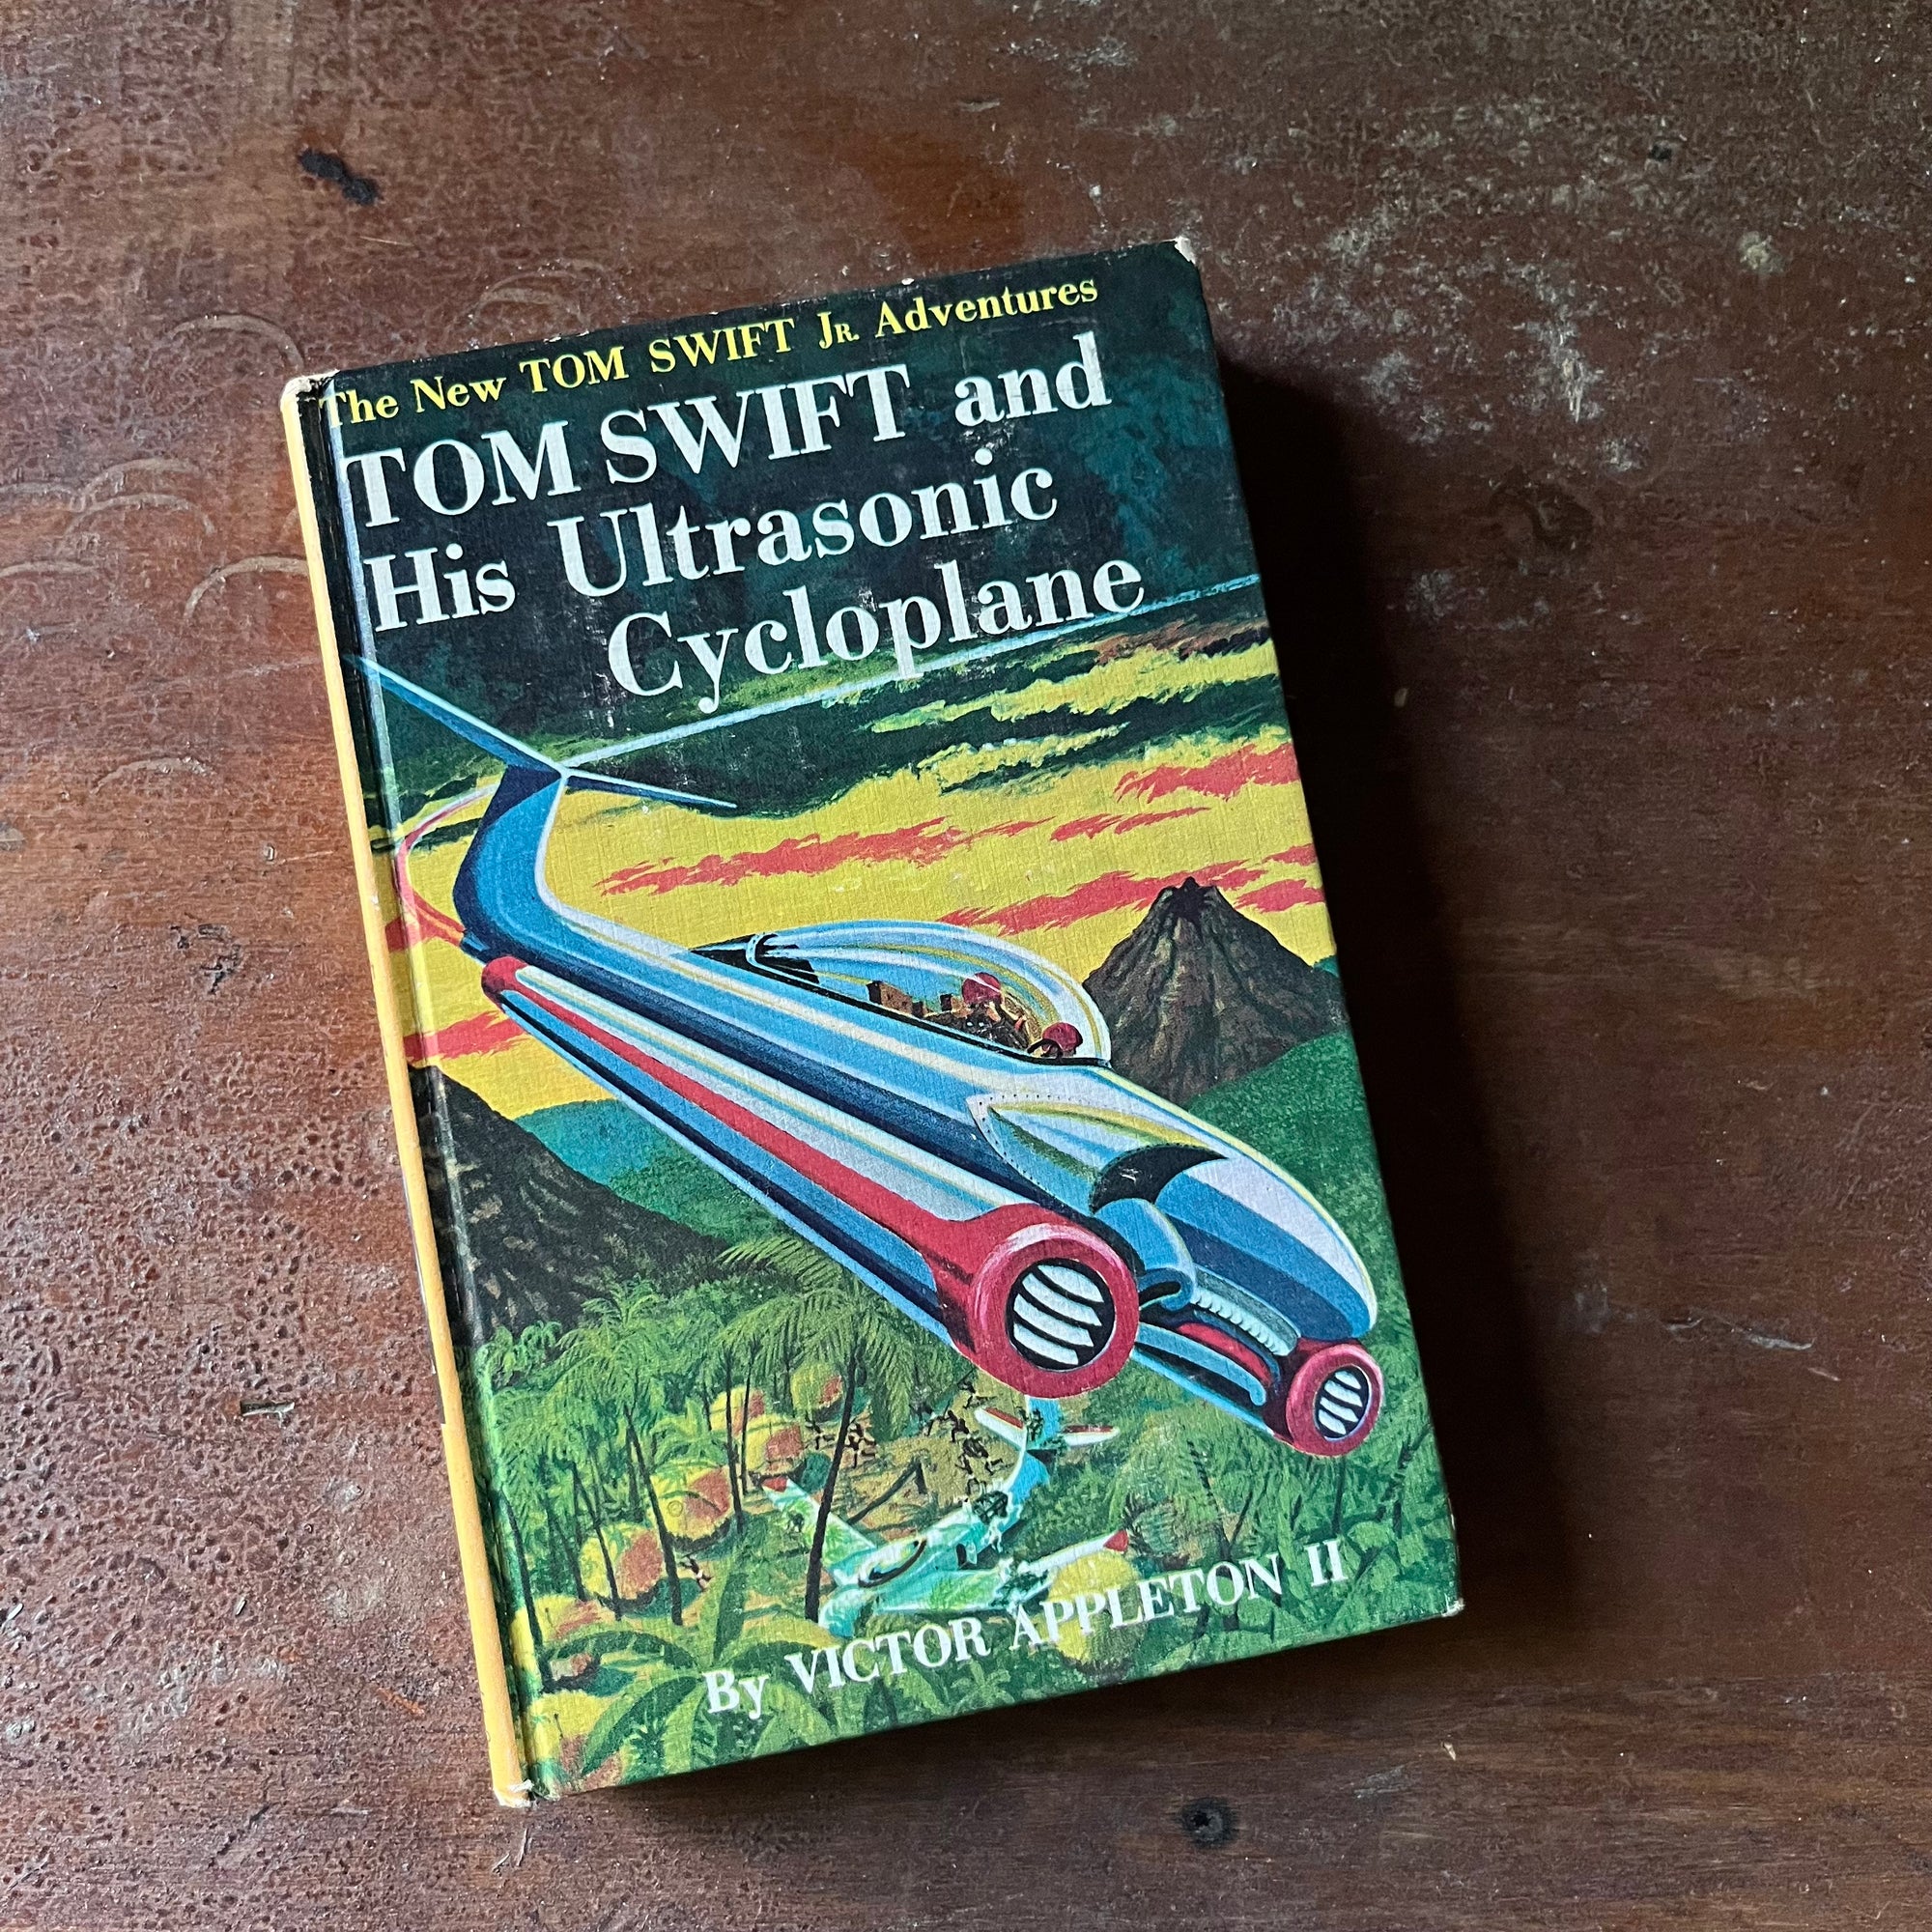 vintage children's chapter book, The New Tom Swift Jr. Adventure Book - Tom Swift and His Ultrasonic Cycloplane written by Victor Appleton II with illustrations by Graham Kaye - view of the front cover in vivid colors showing the cycloplane zooming above a jungle landscape